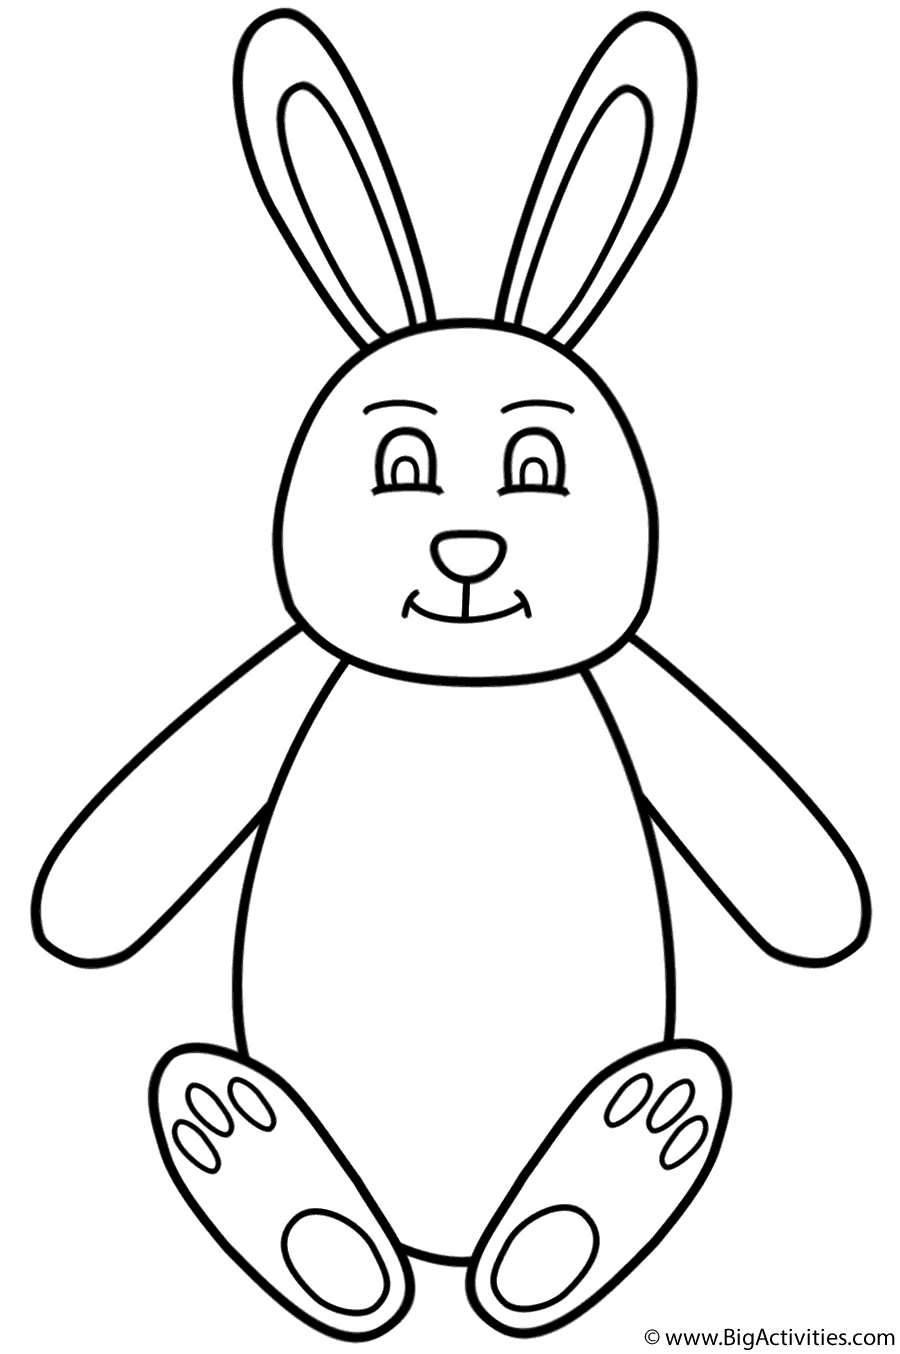 Easter Bunny Sitting - Coloring Page (Easter)